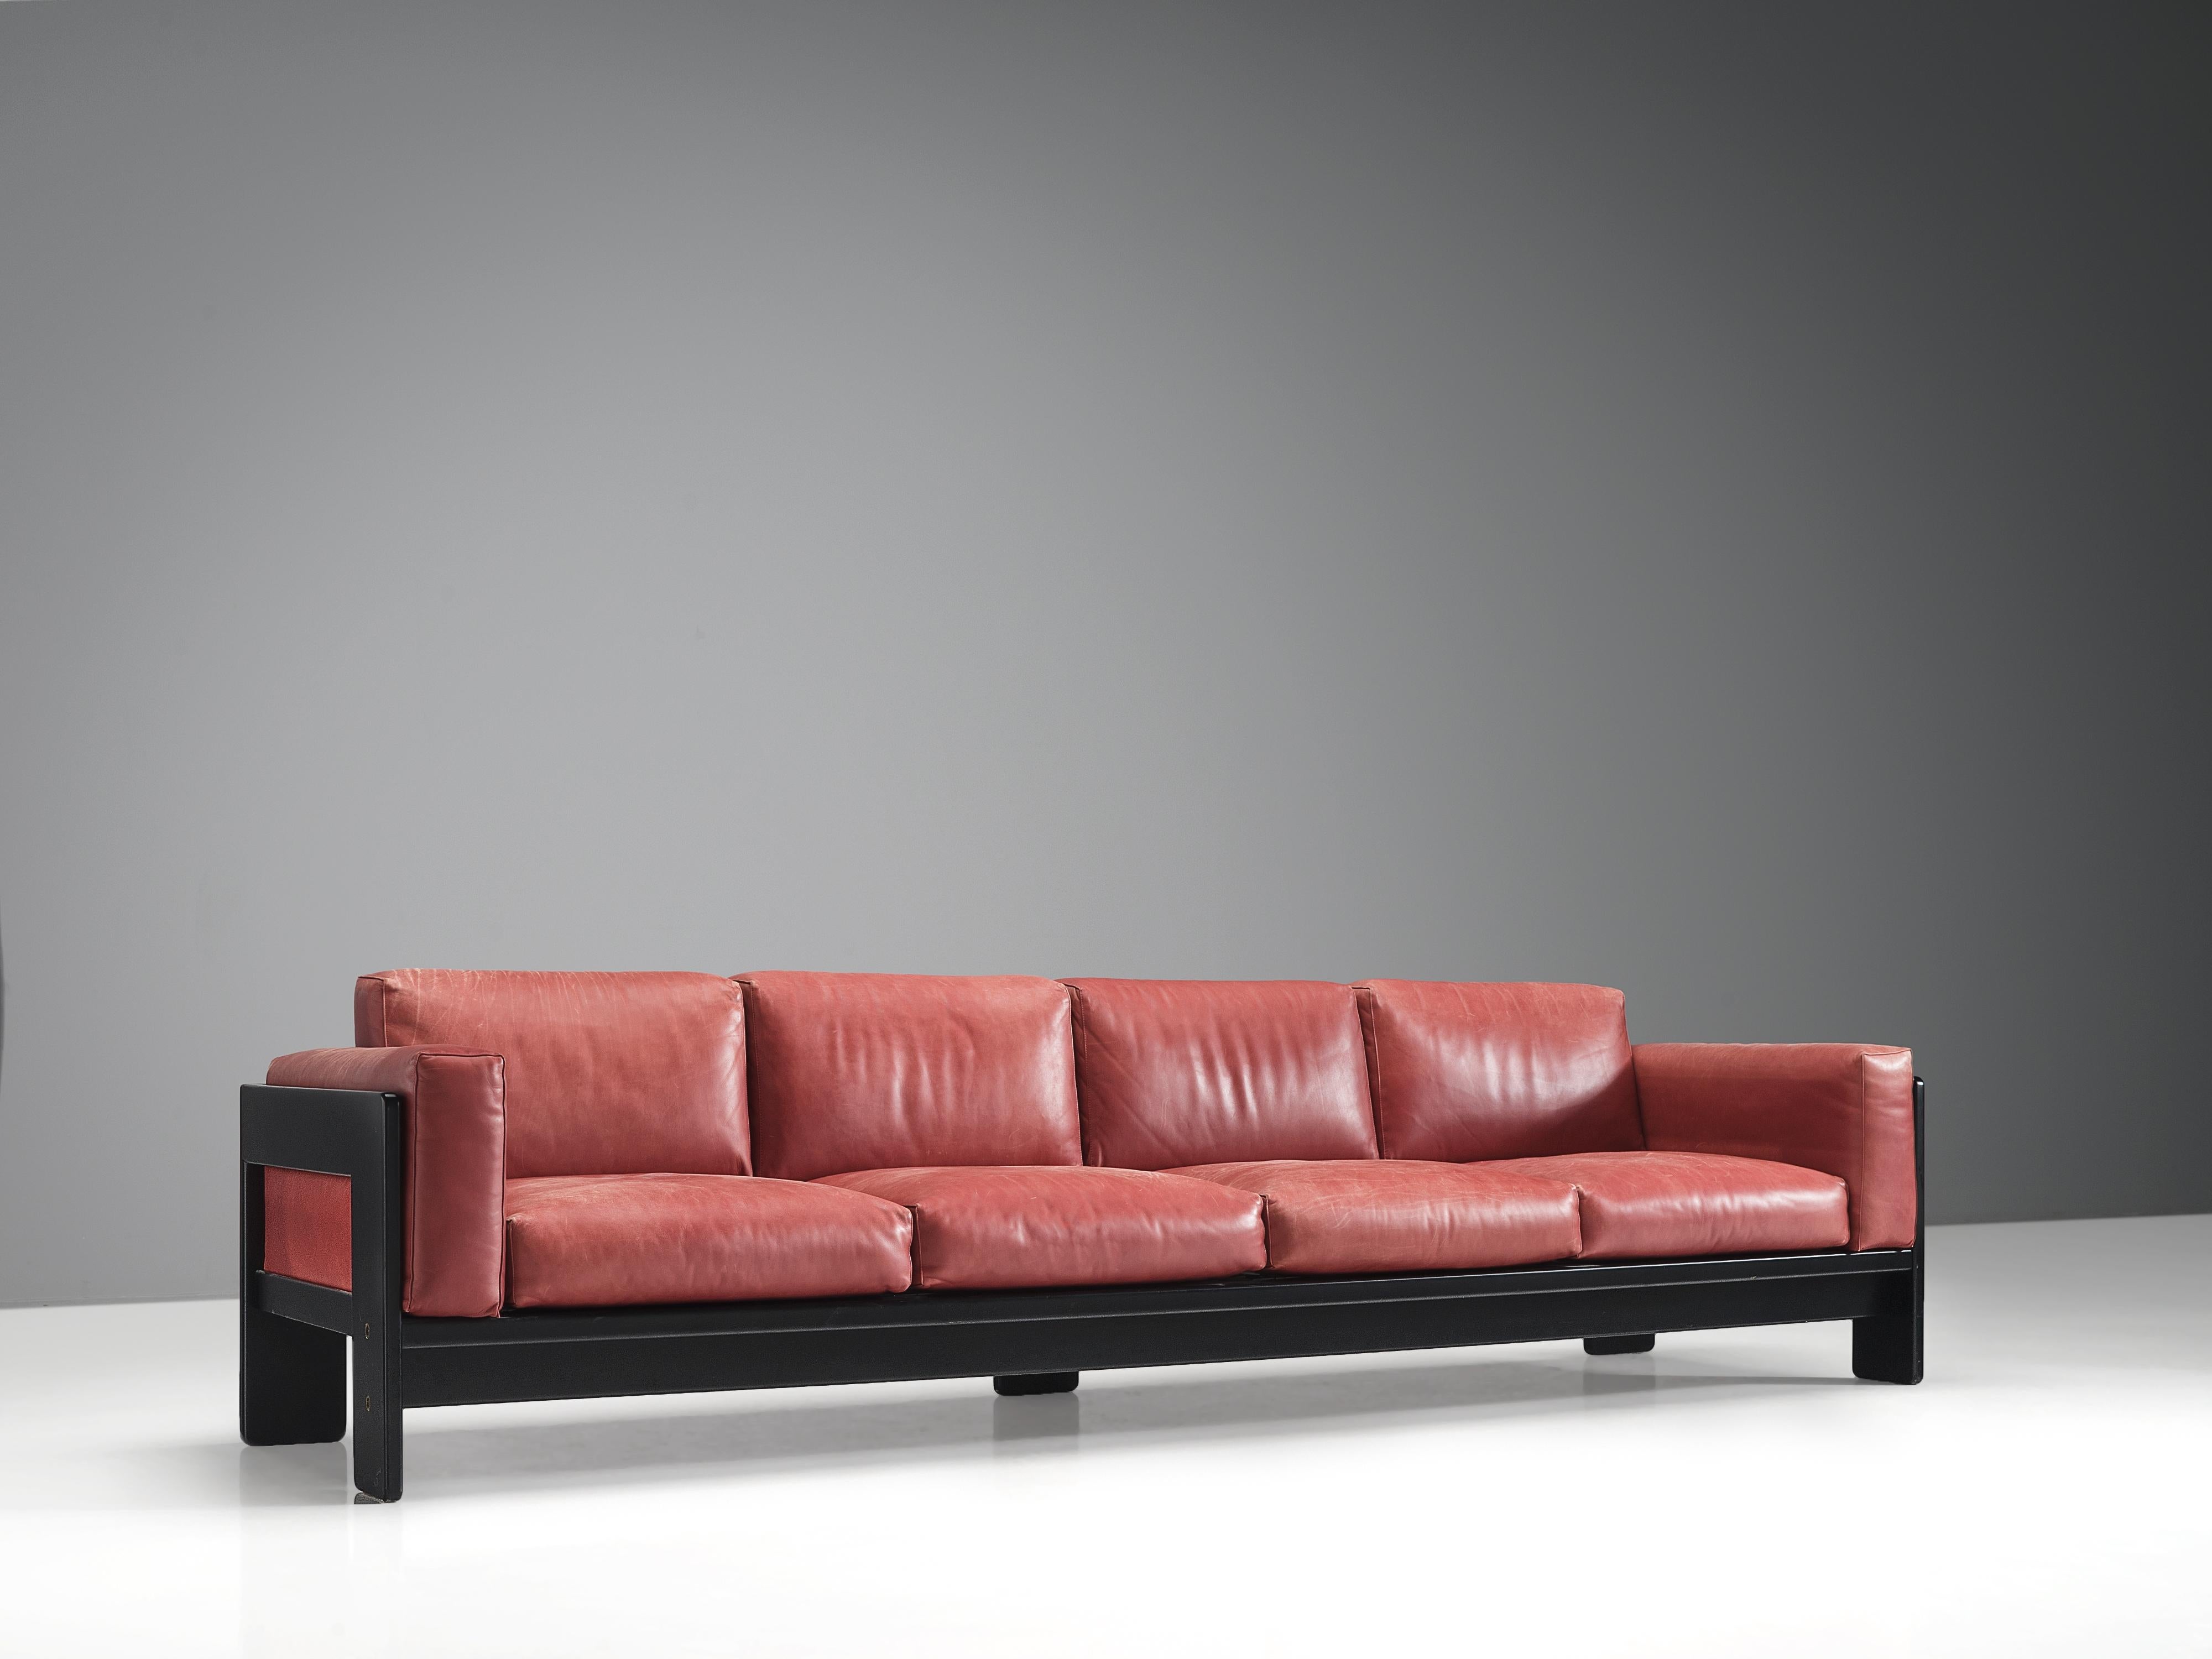 Italian Afra & Tobia Scarpa for Knoll 'Bastiano' Four-Seat Sofa in Red Leather